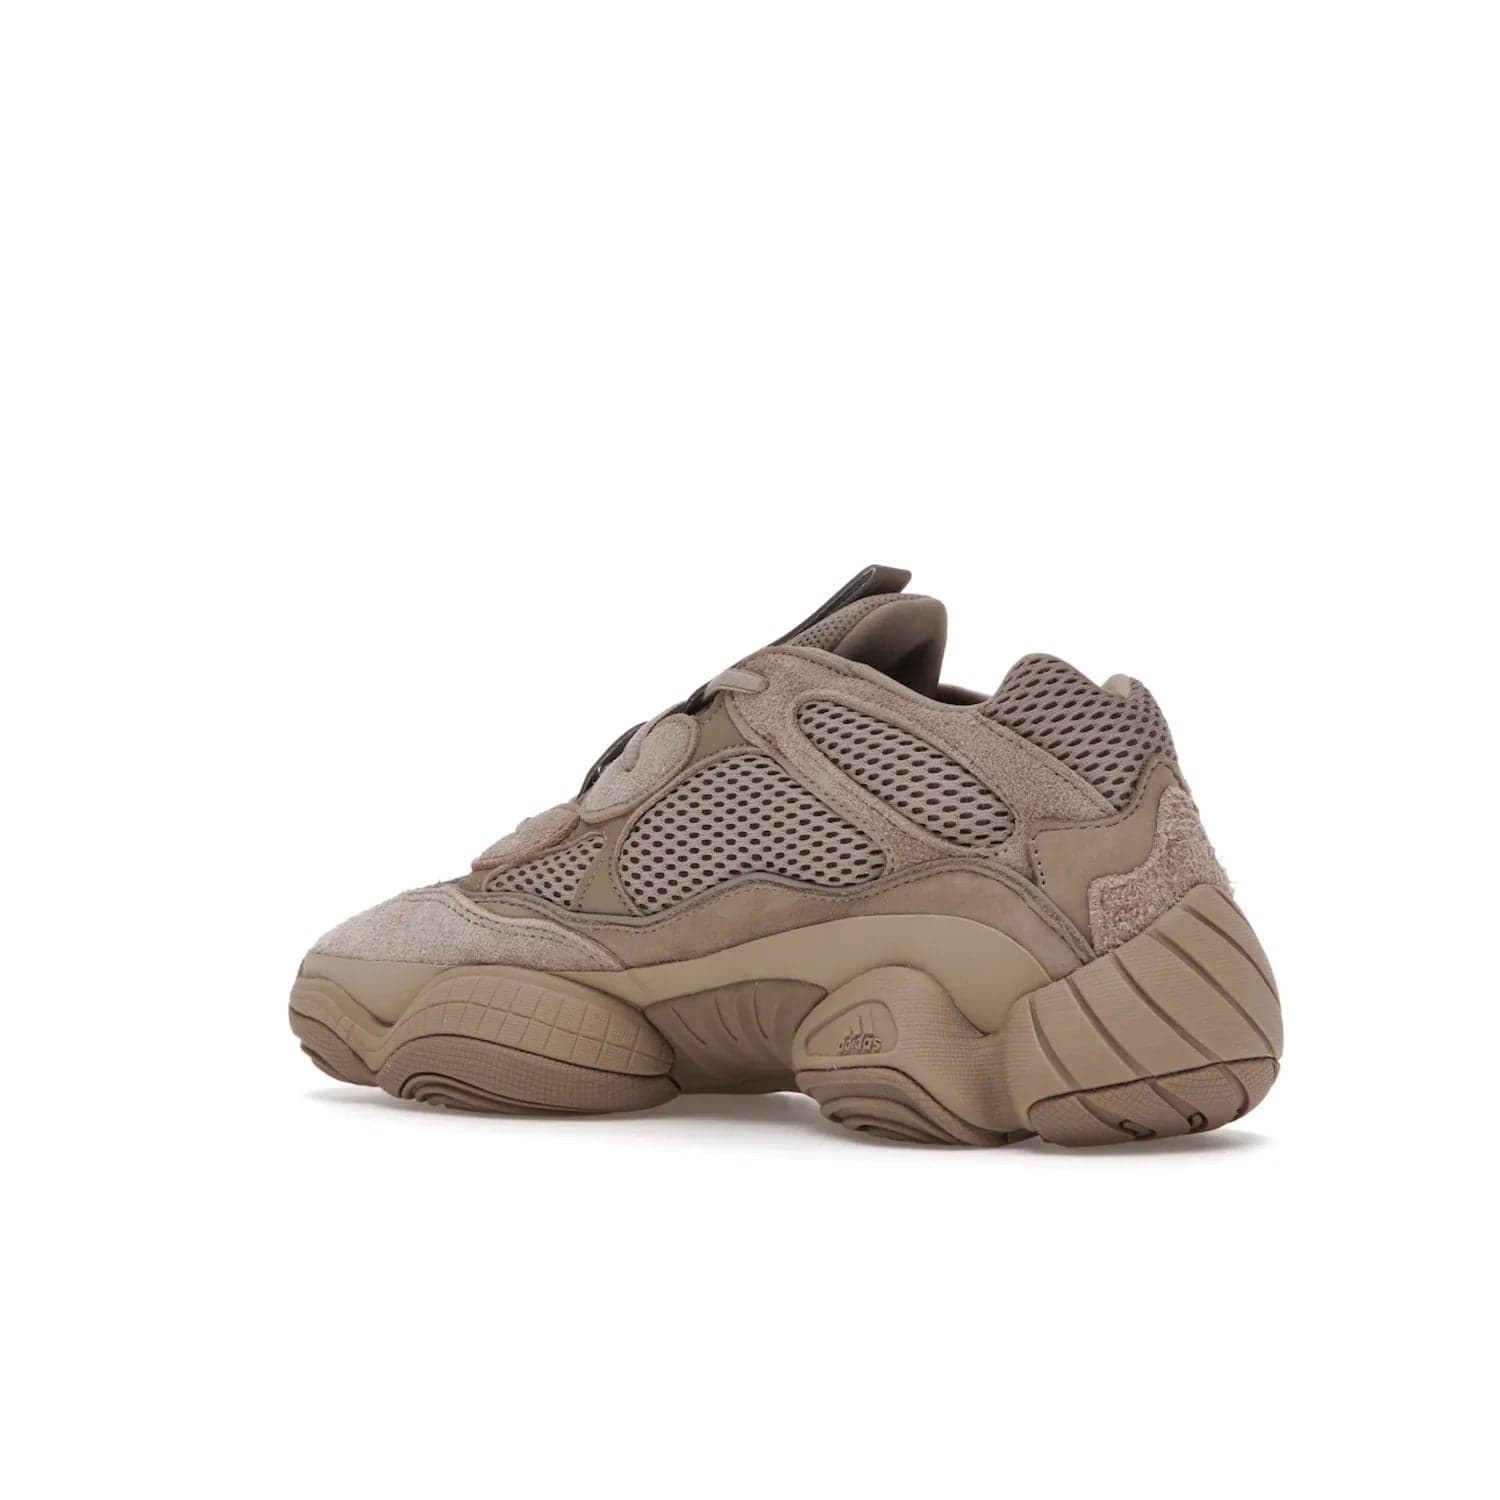 adidas Yeezy 500 Taupe Light - Image 23 - Only at www.BallersClubKickz.com - The adidas Yeezy 500 Taupe Light combines mesh, leather, and suede, with a durable adiPRENE sole for an eye-catching accessory. Reflective piping adds the perfect finishing touches to this unique silhouette. Ideal for any wardrobe, releasing in June 2021.